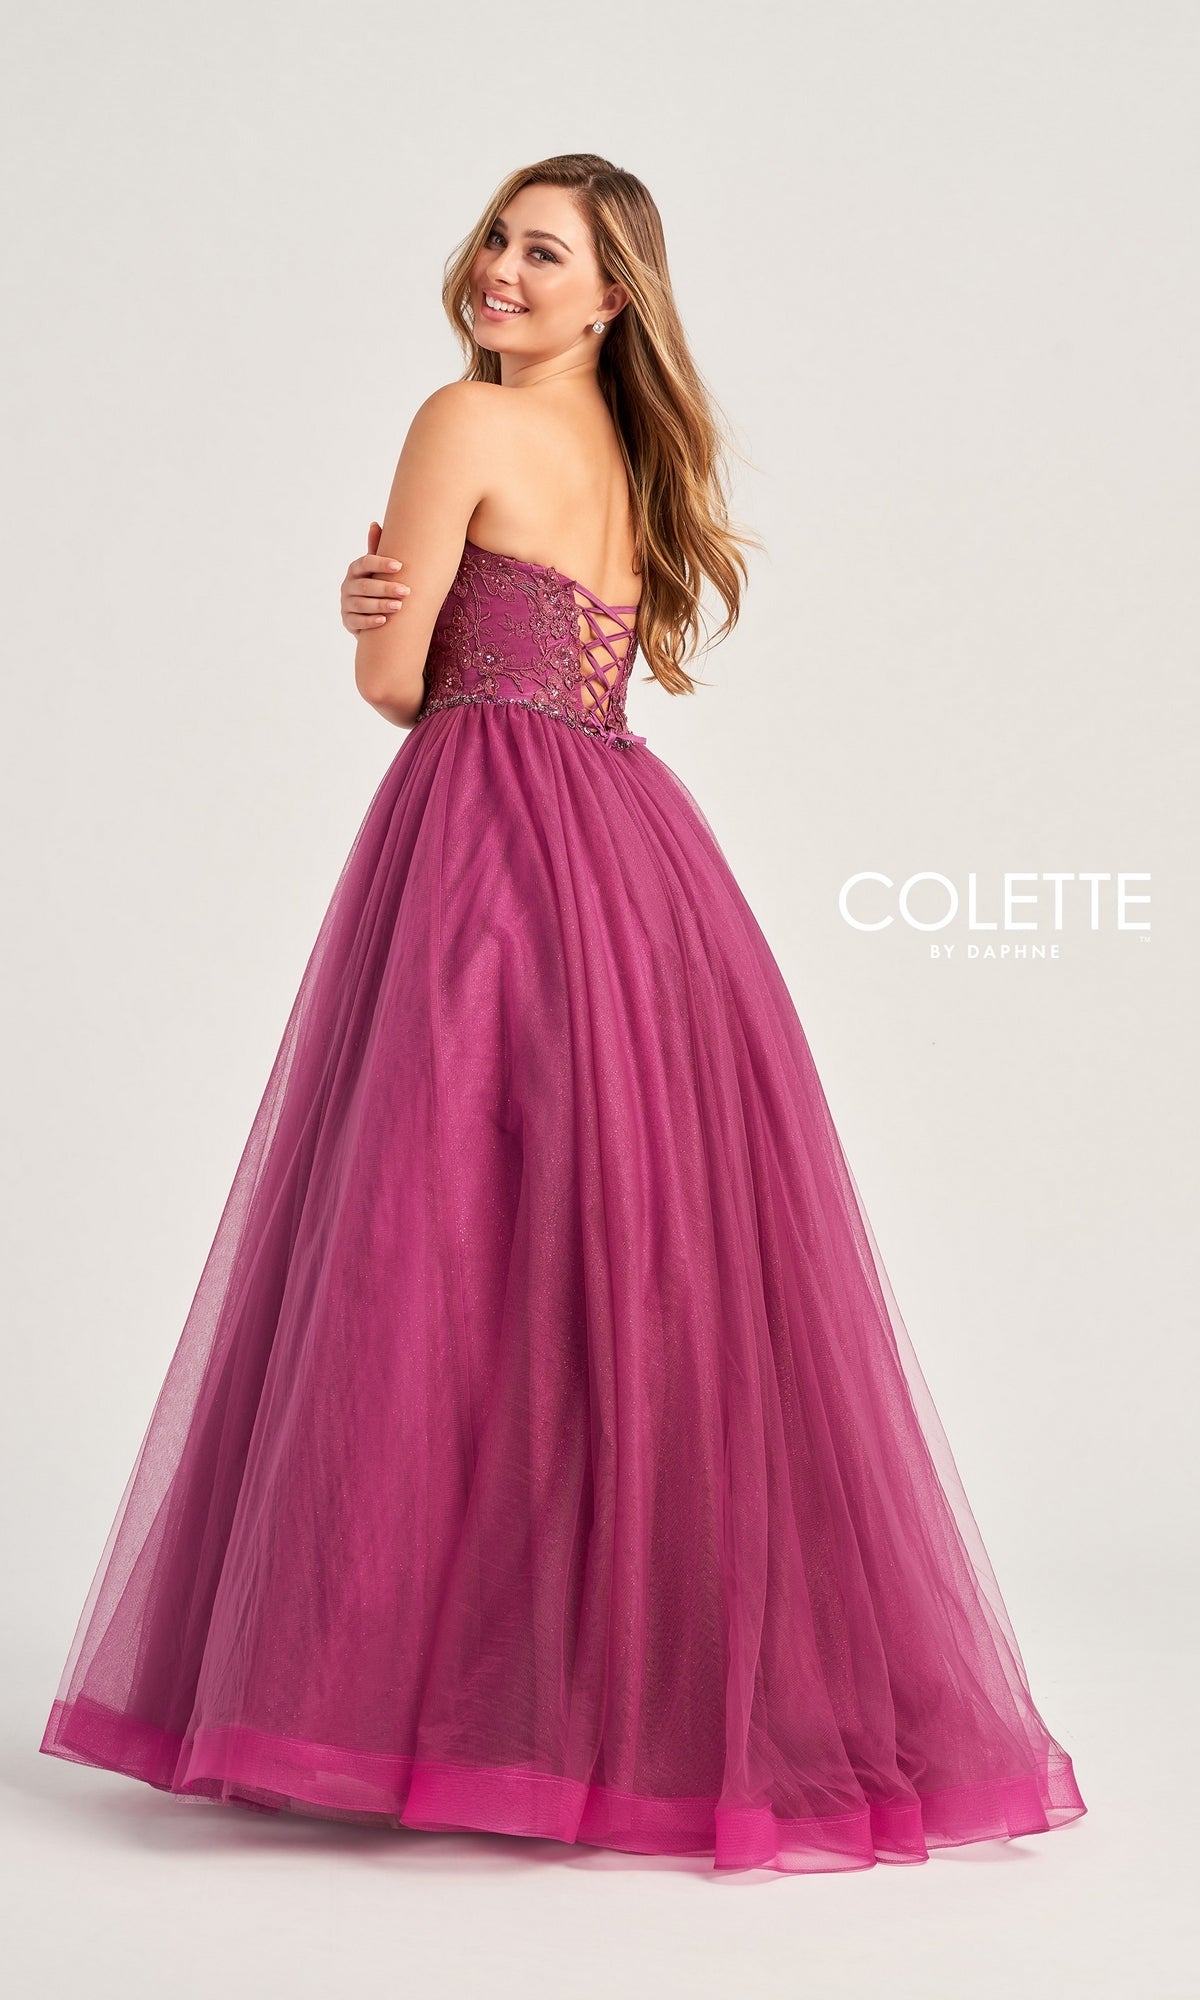 Colette Strapless Sweetheart Prom Ball Gown CL5193